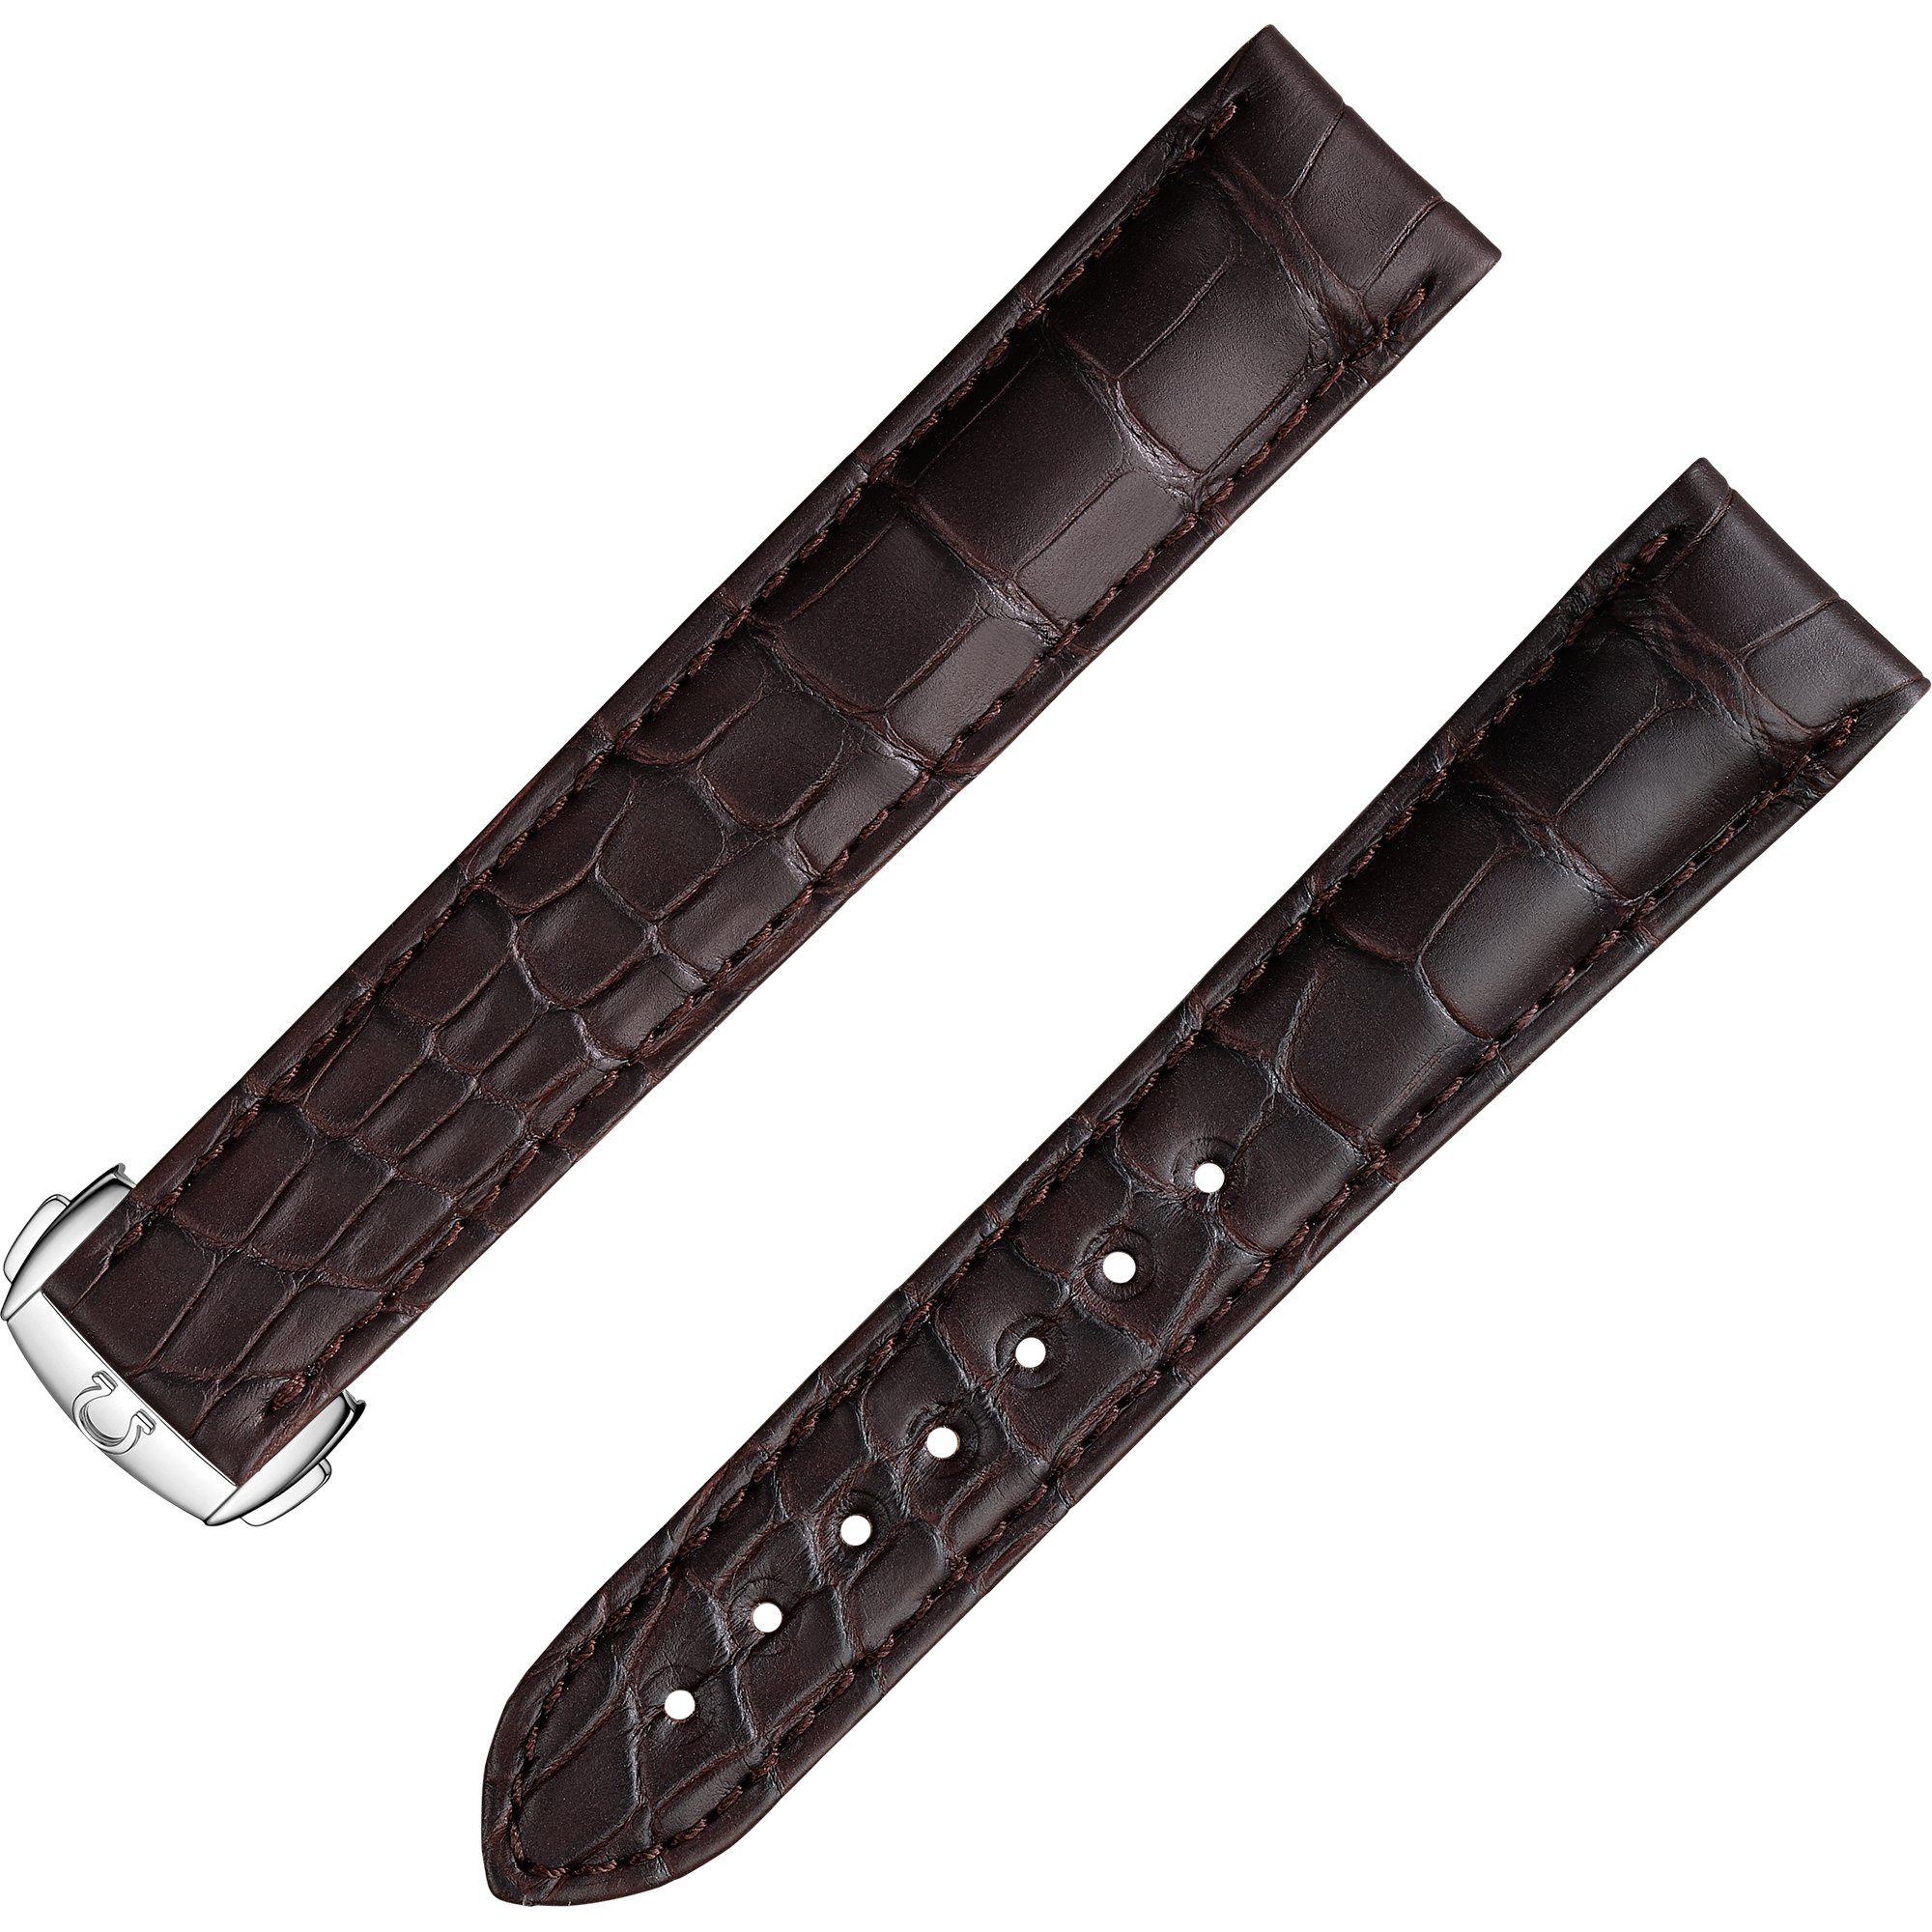 Two-piece strap - Brown alligator leather strap with foldover clasp - 9800.02.75